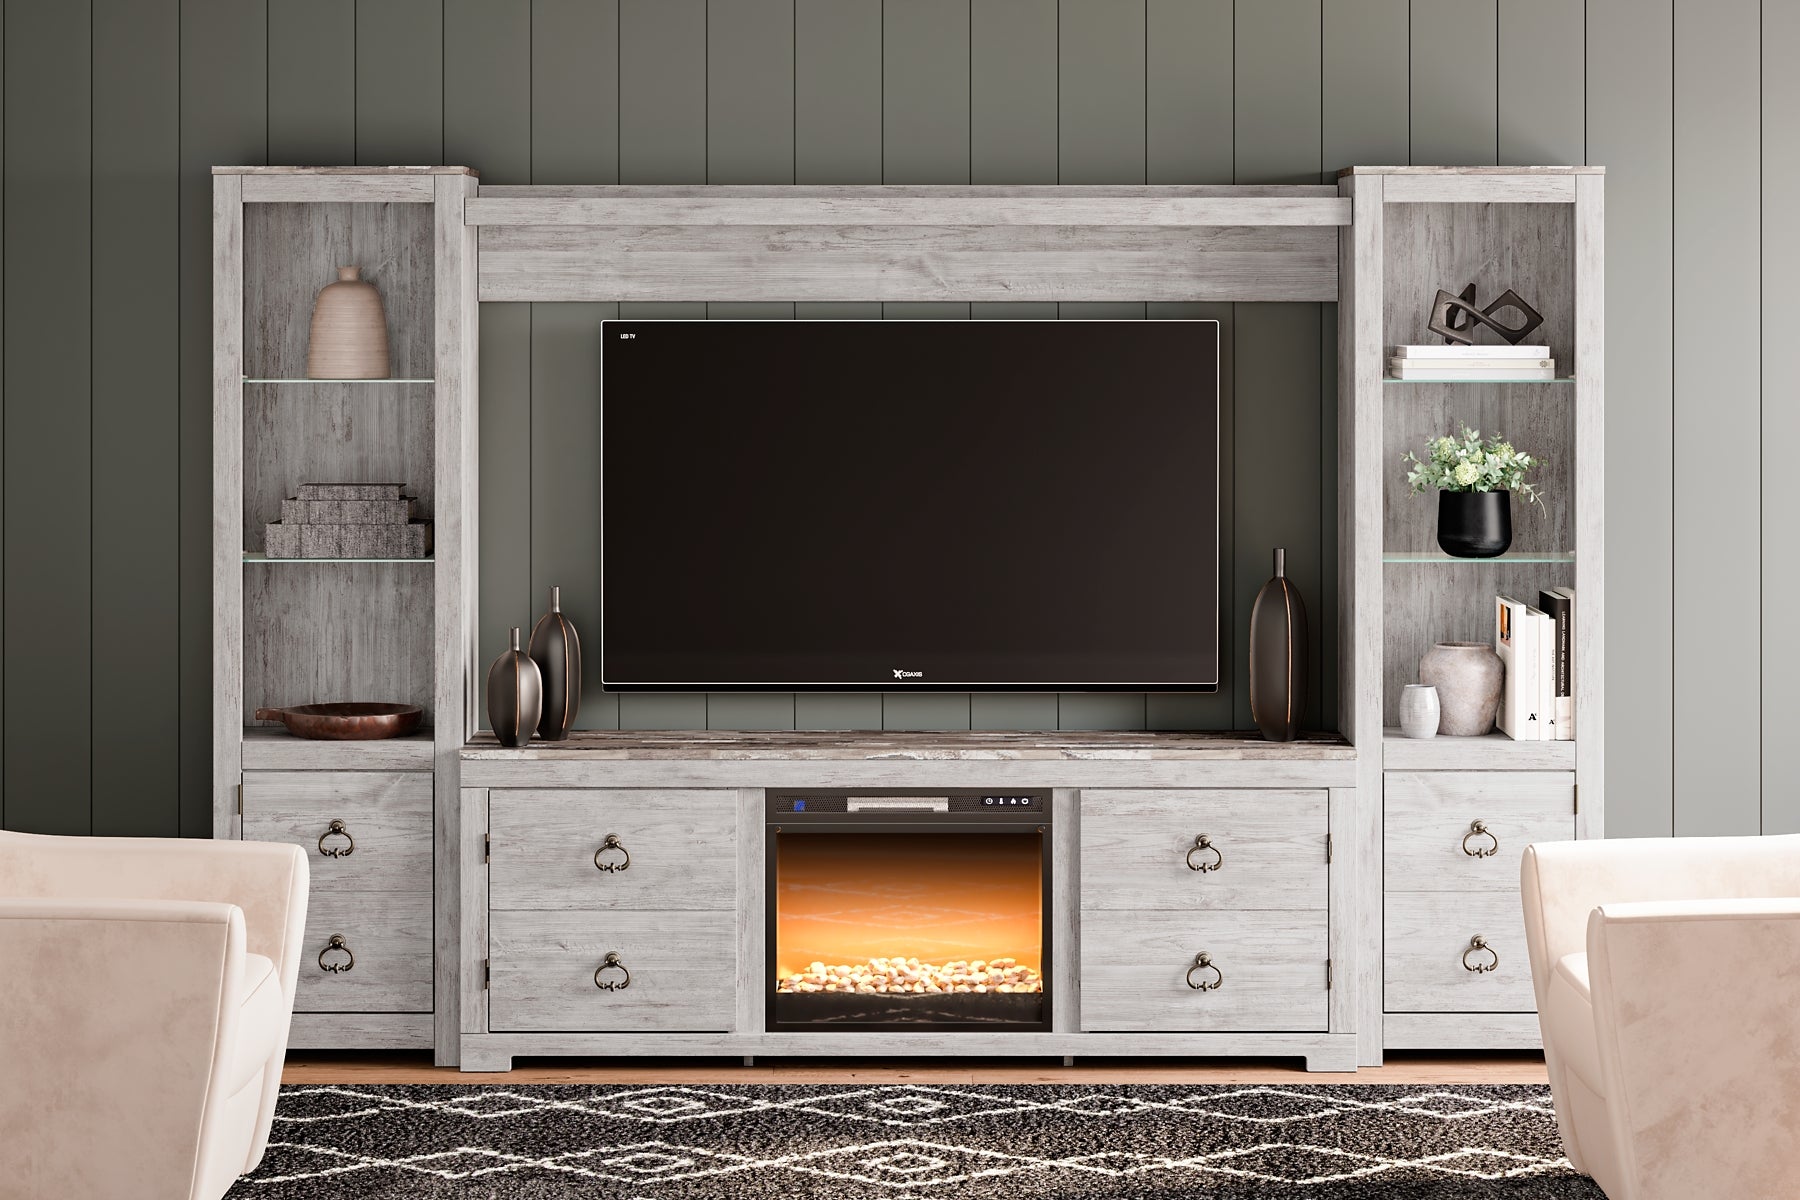 Ashley Express - Willowton 4-Piece Entertainment Center with Electric Fireplace Wilson Furniture (OH)  in Bridgeport, Ohio. Serving Bridgeport, Yorkville, Bellaire, & Avondale